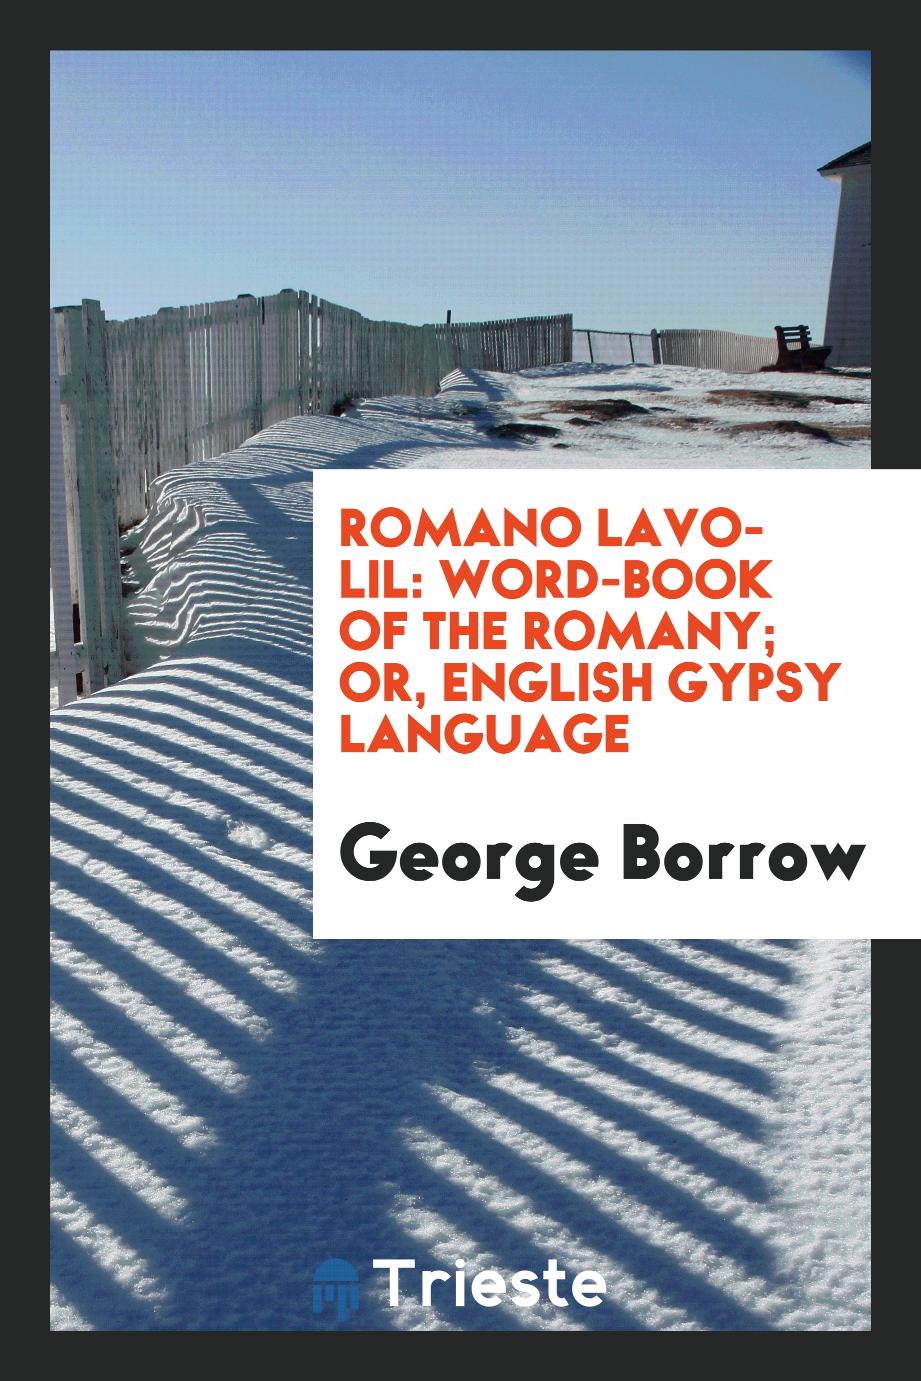 Romano Lavo-lil: Word-book of the Romany; Or, English Gypsy Language